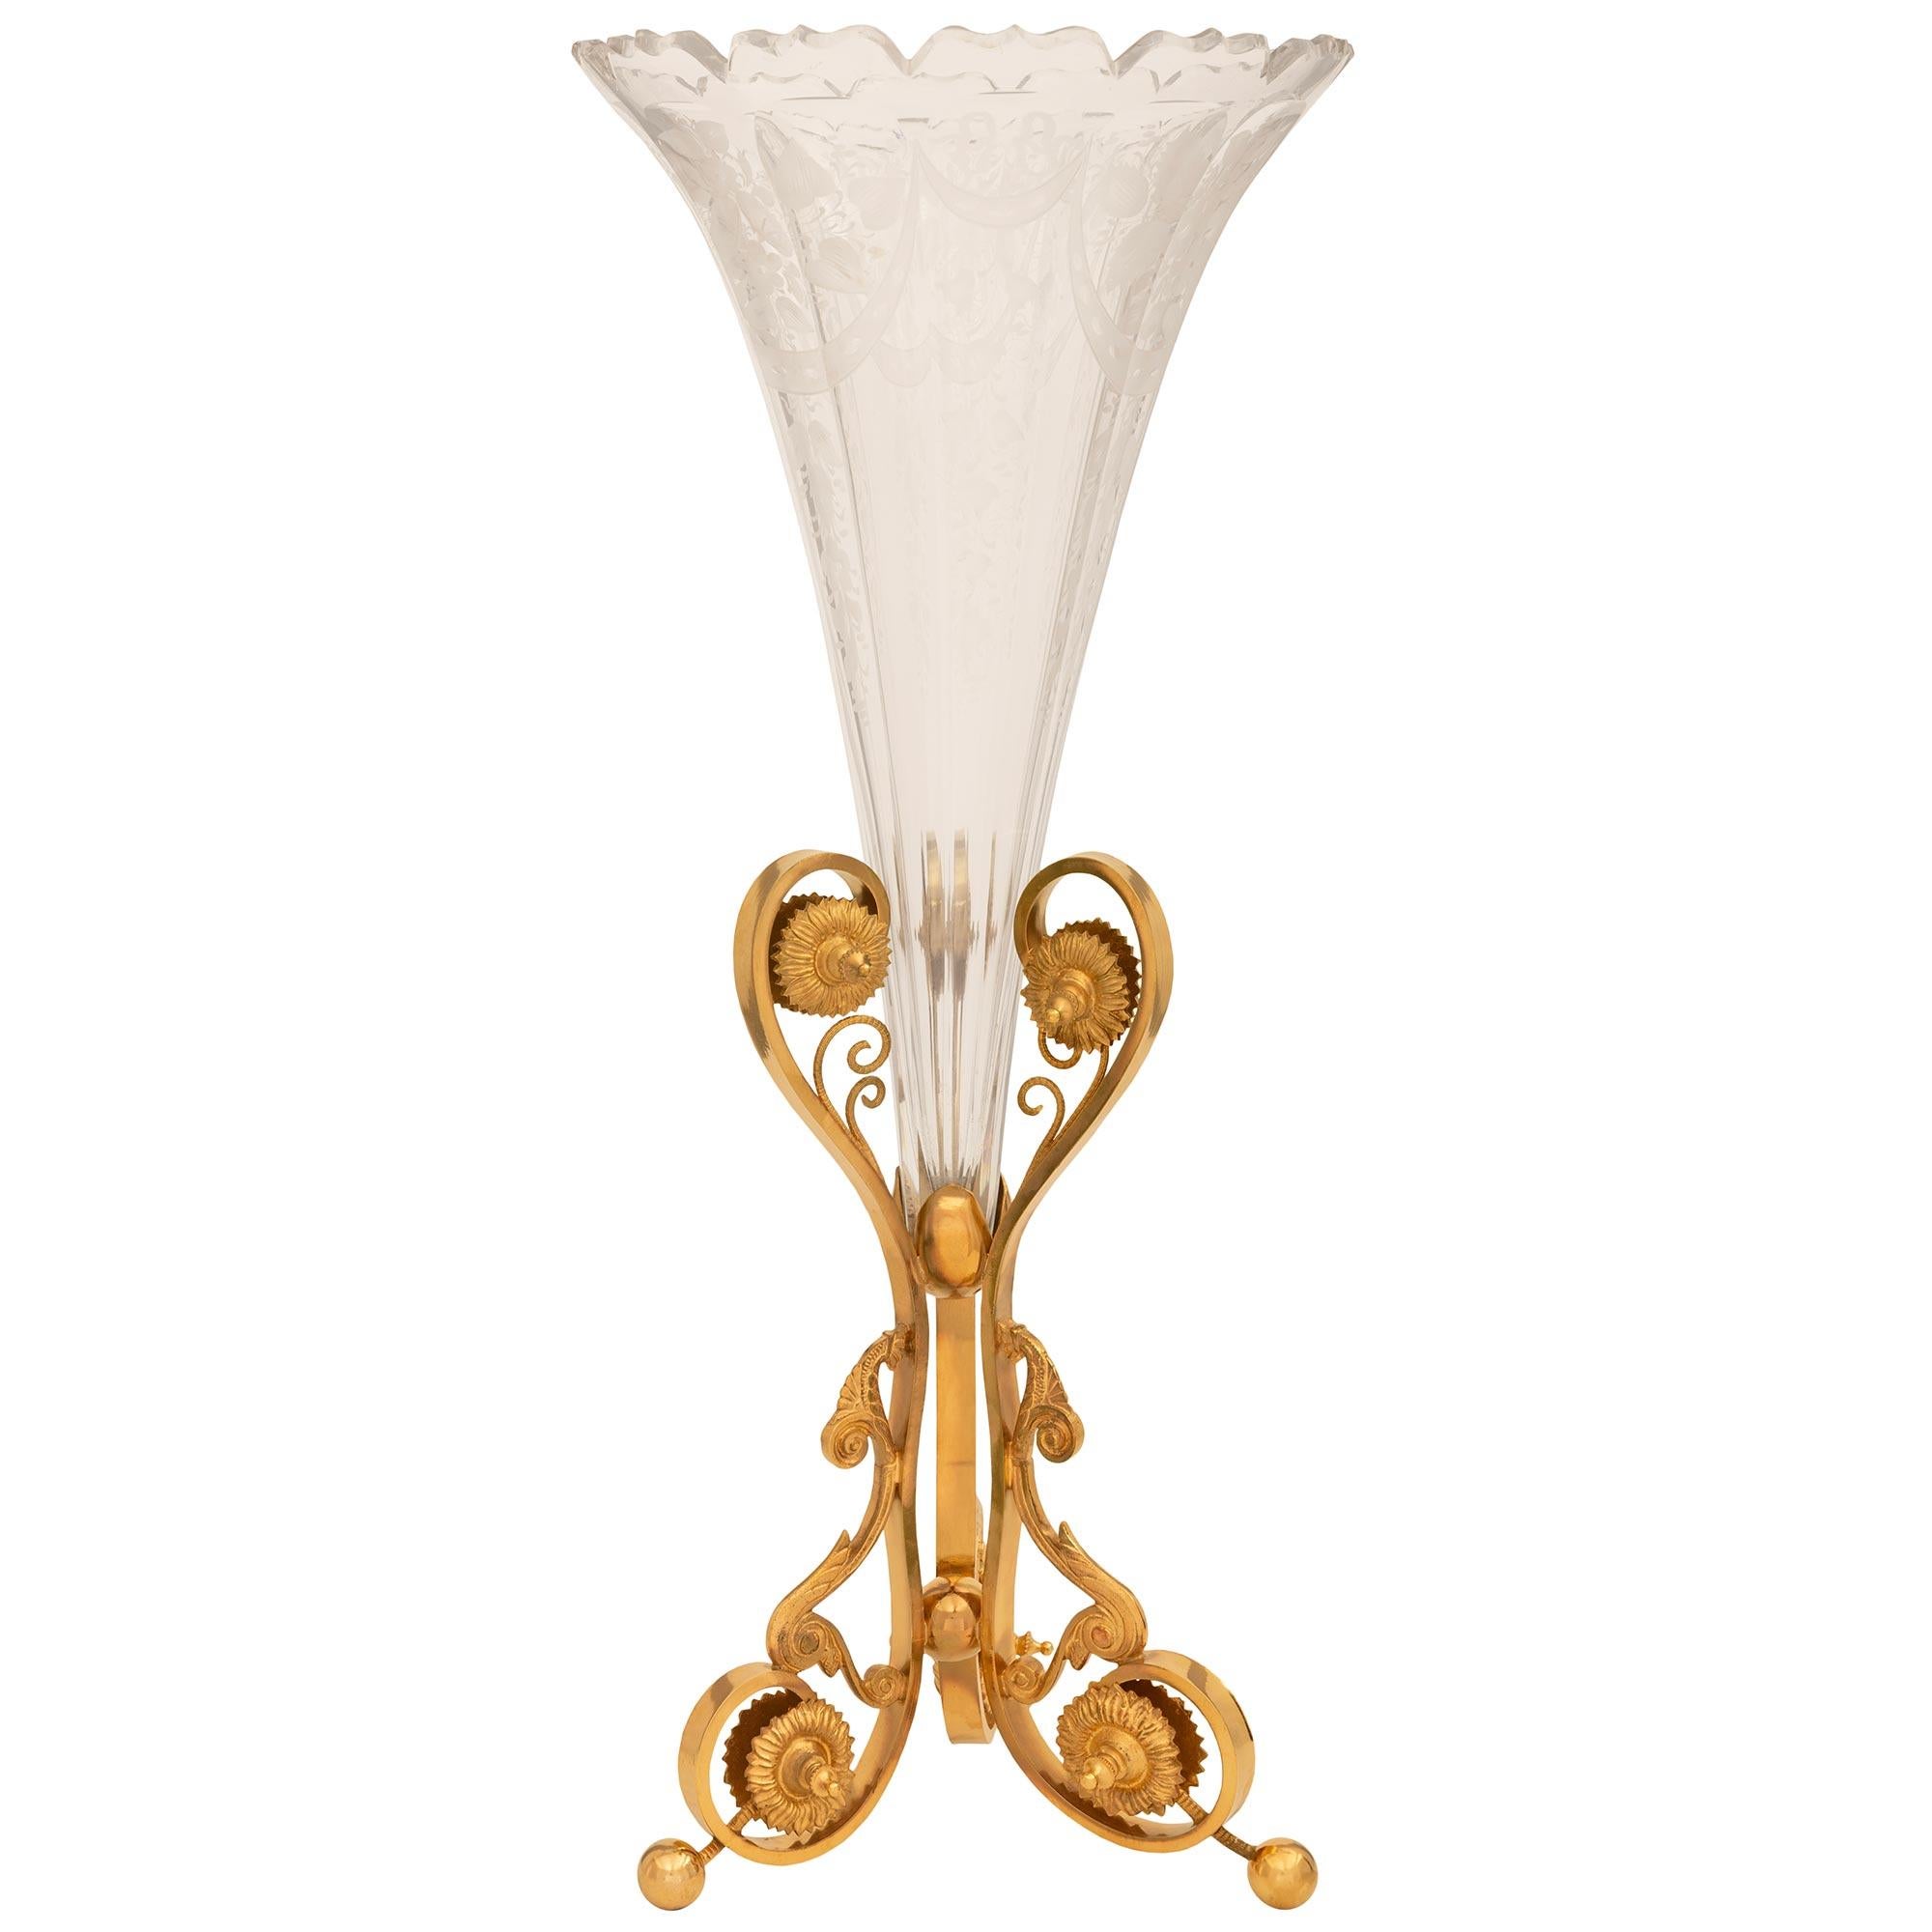 French Turn Of The Century Louis XVI St. Baccarat Crystal & Ormolu Mounted Vase In Good Condition For Sale In West Palm Beach, FL